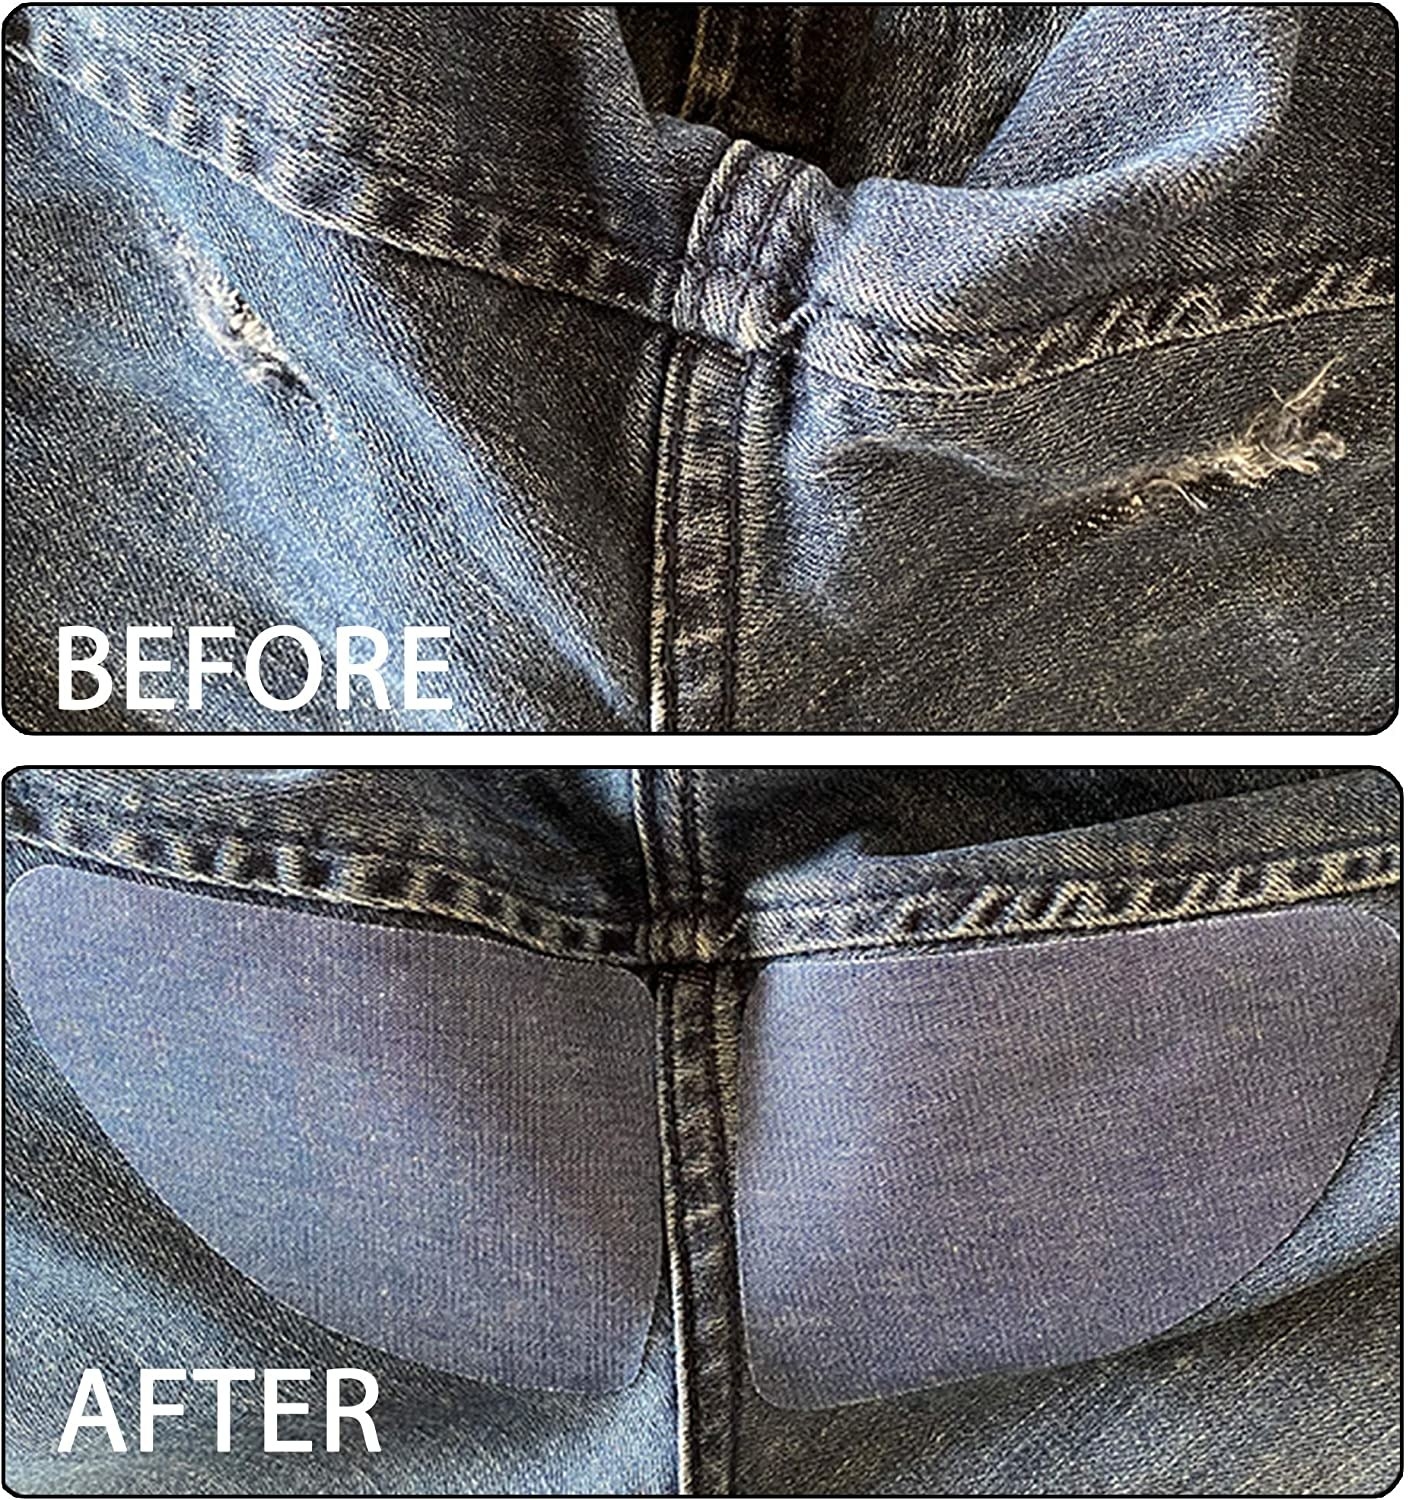 A before photo of jeans with holes by the crotch and an after photo with the patches on those holes